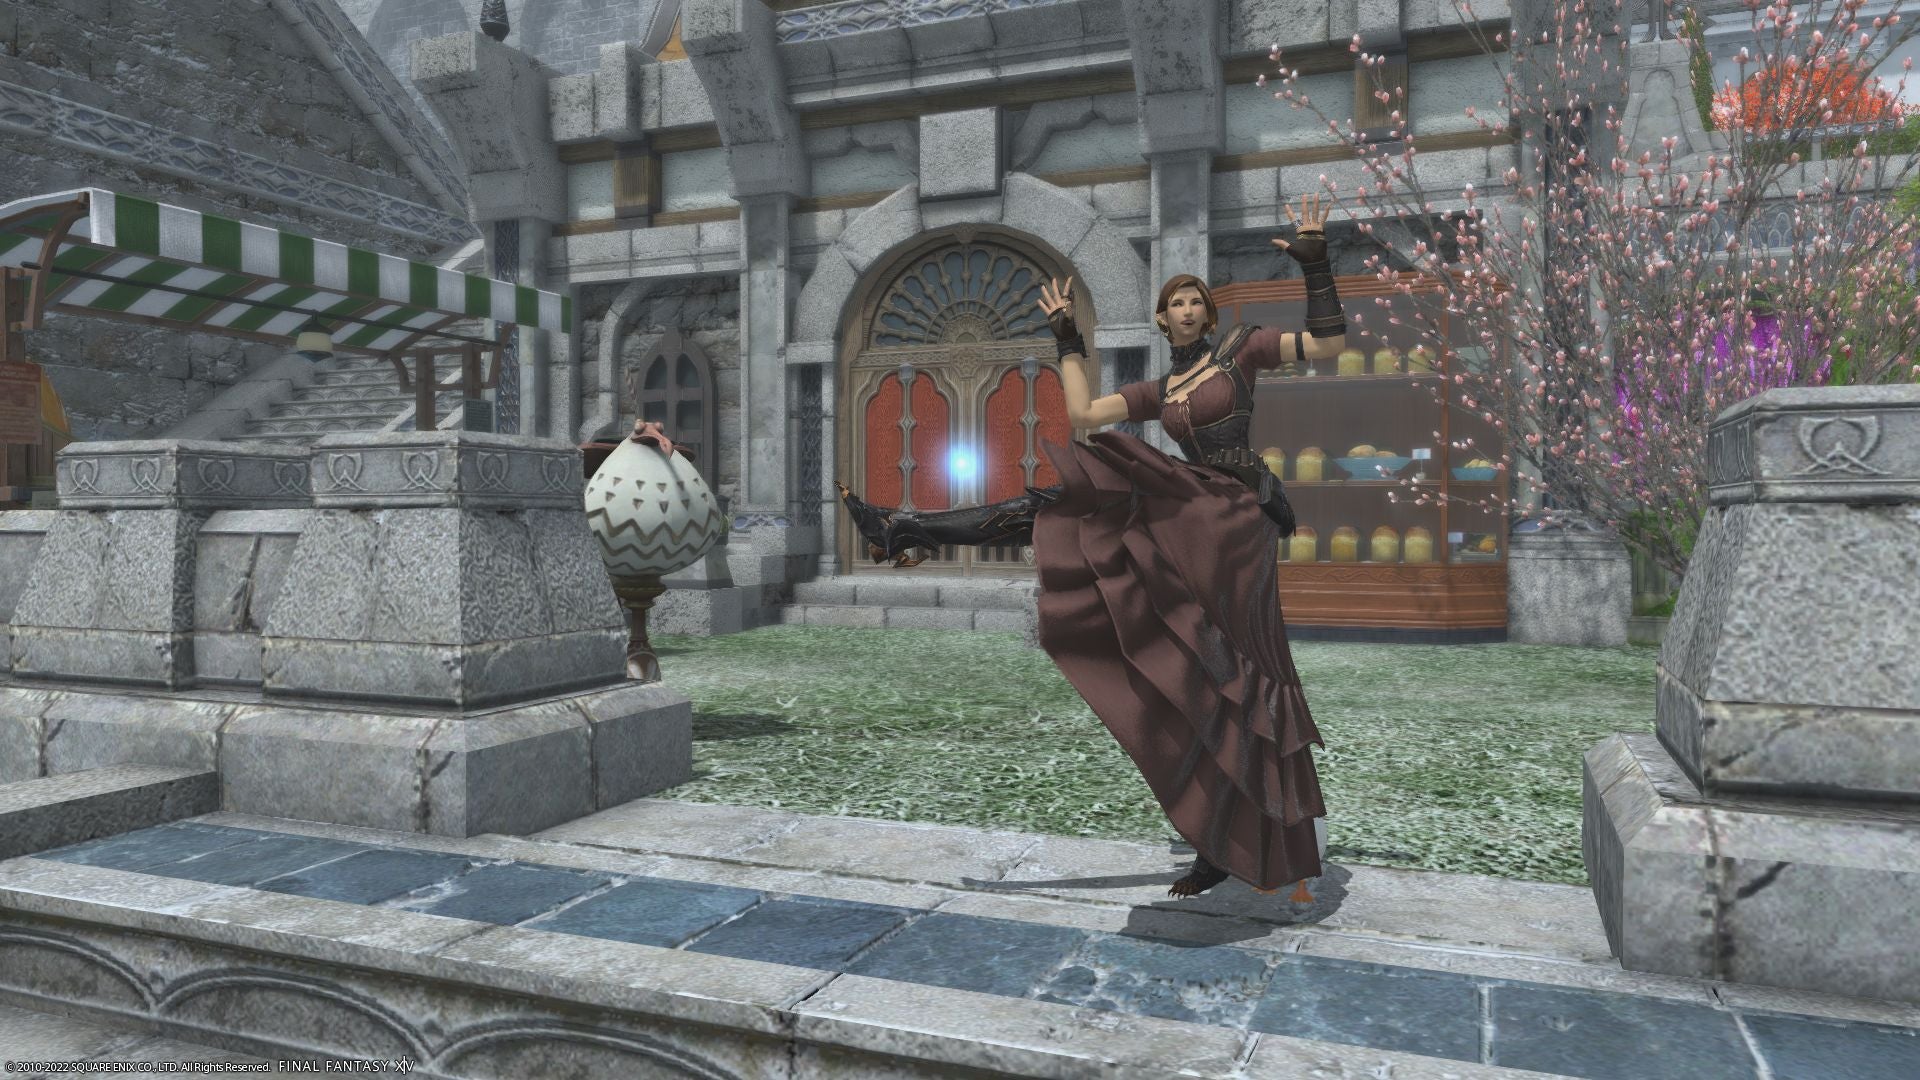 FF14 State of the Game - player character doing a dance pose